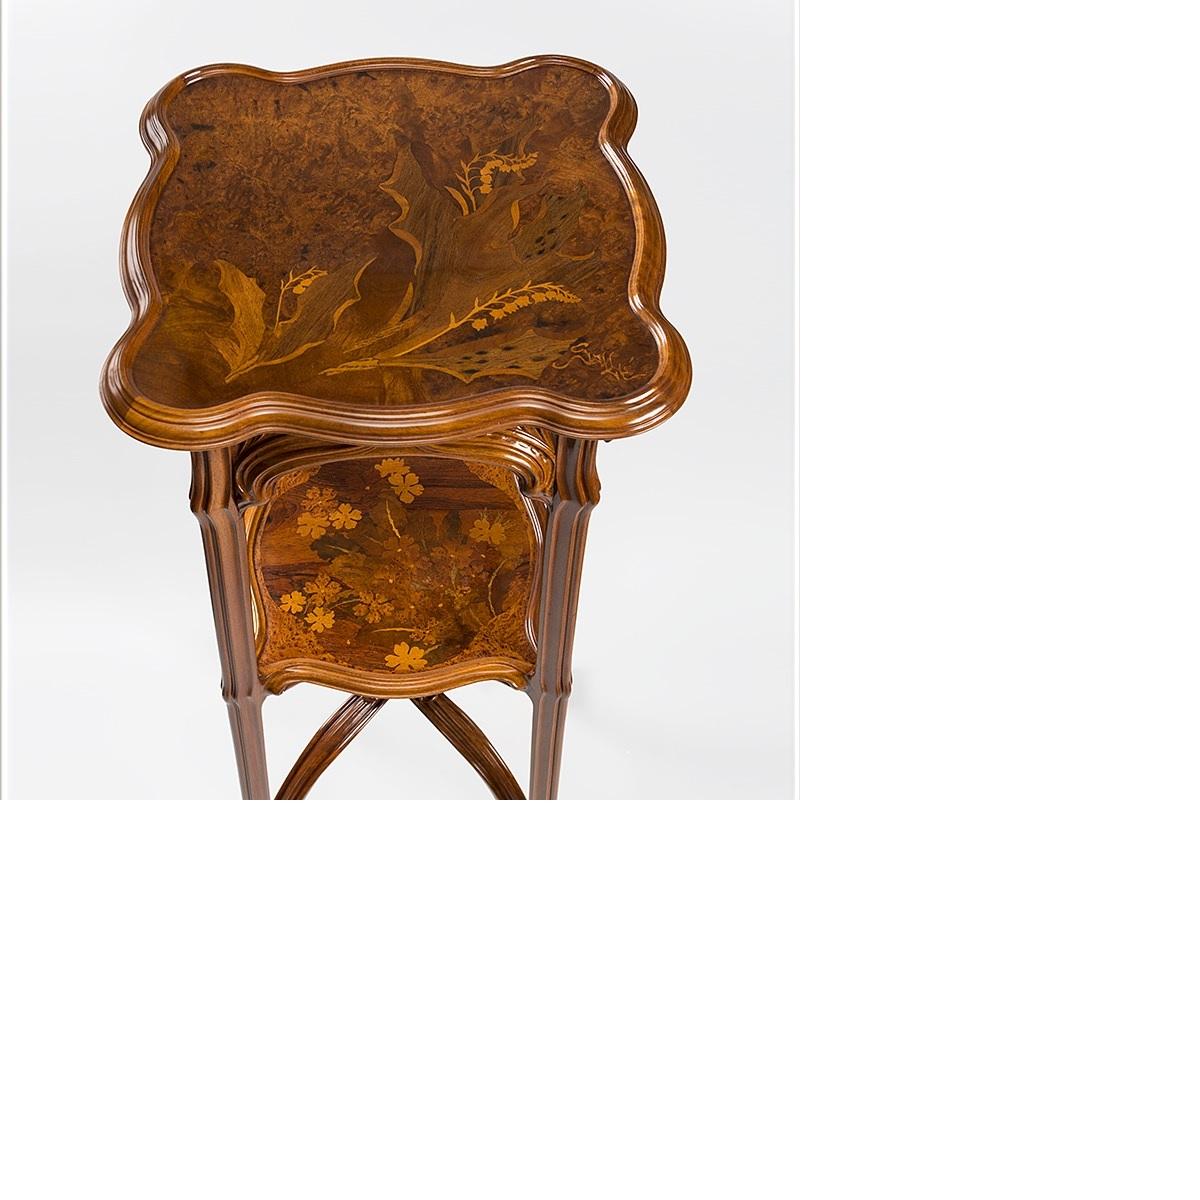 A French Art Nouveau selette by Émile Gallé. Gallé made very few selettes of this quality and design during his career, and even fewer of those with curved lower pieces that reunite in the middle, culminating in a gorgeous flower in full bloom. This